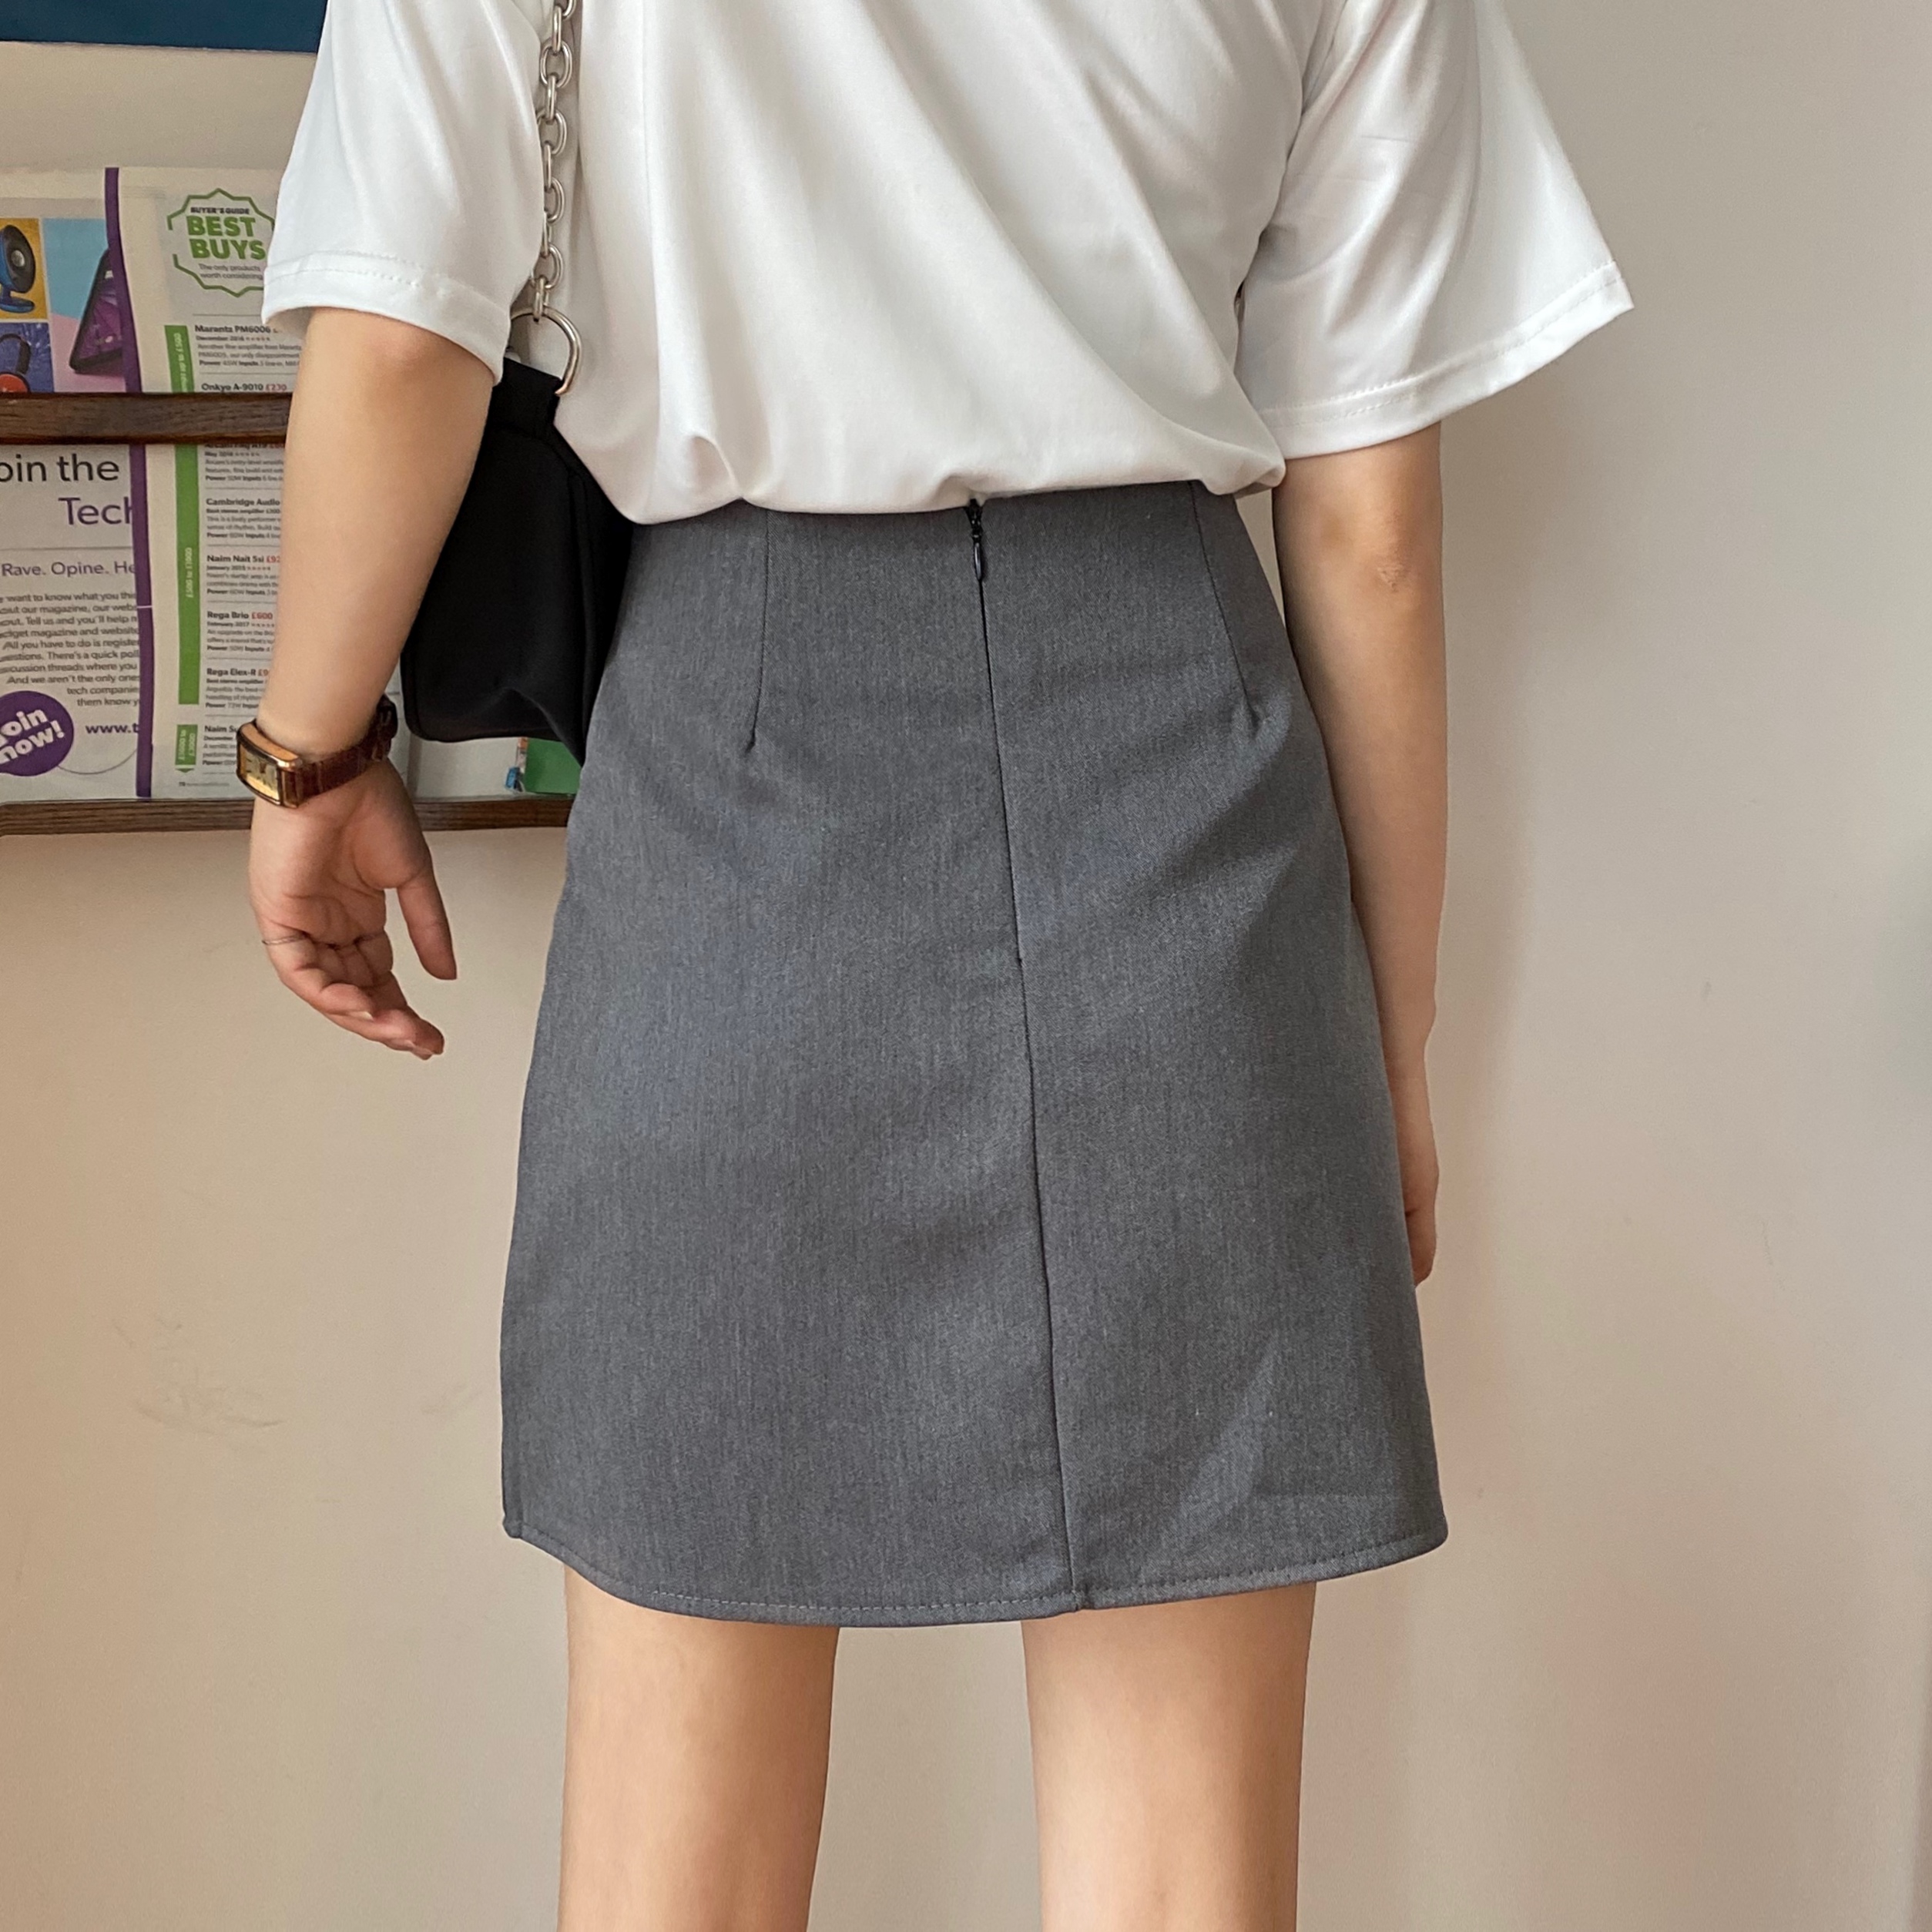 Skirts-Women-Solid-Slit-Empire-Korean-Style-Office-Ladies-Casual-Bodycon-Stylish-Ulzzang-Womens-Comfort-Simple-5.jpg